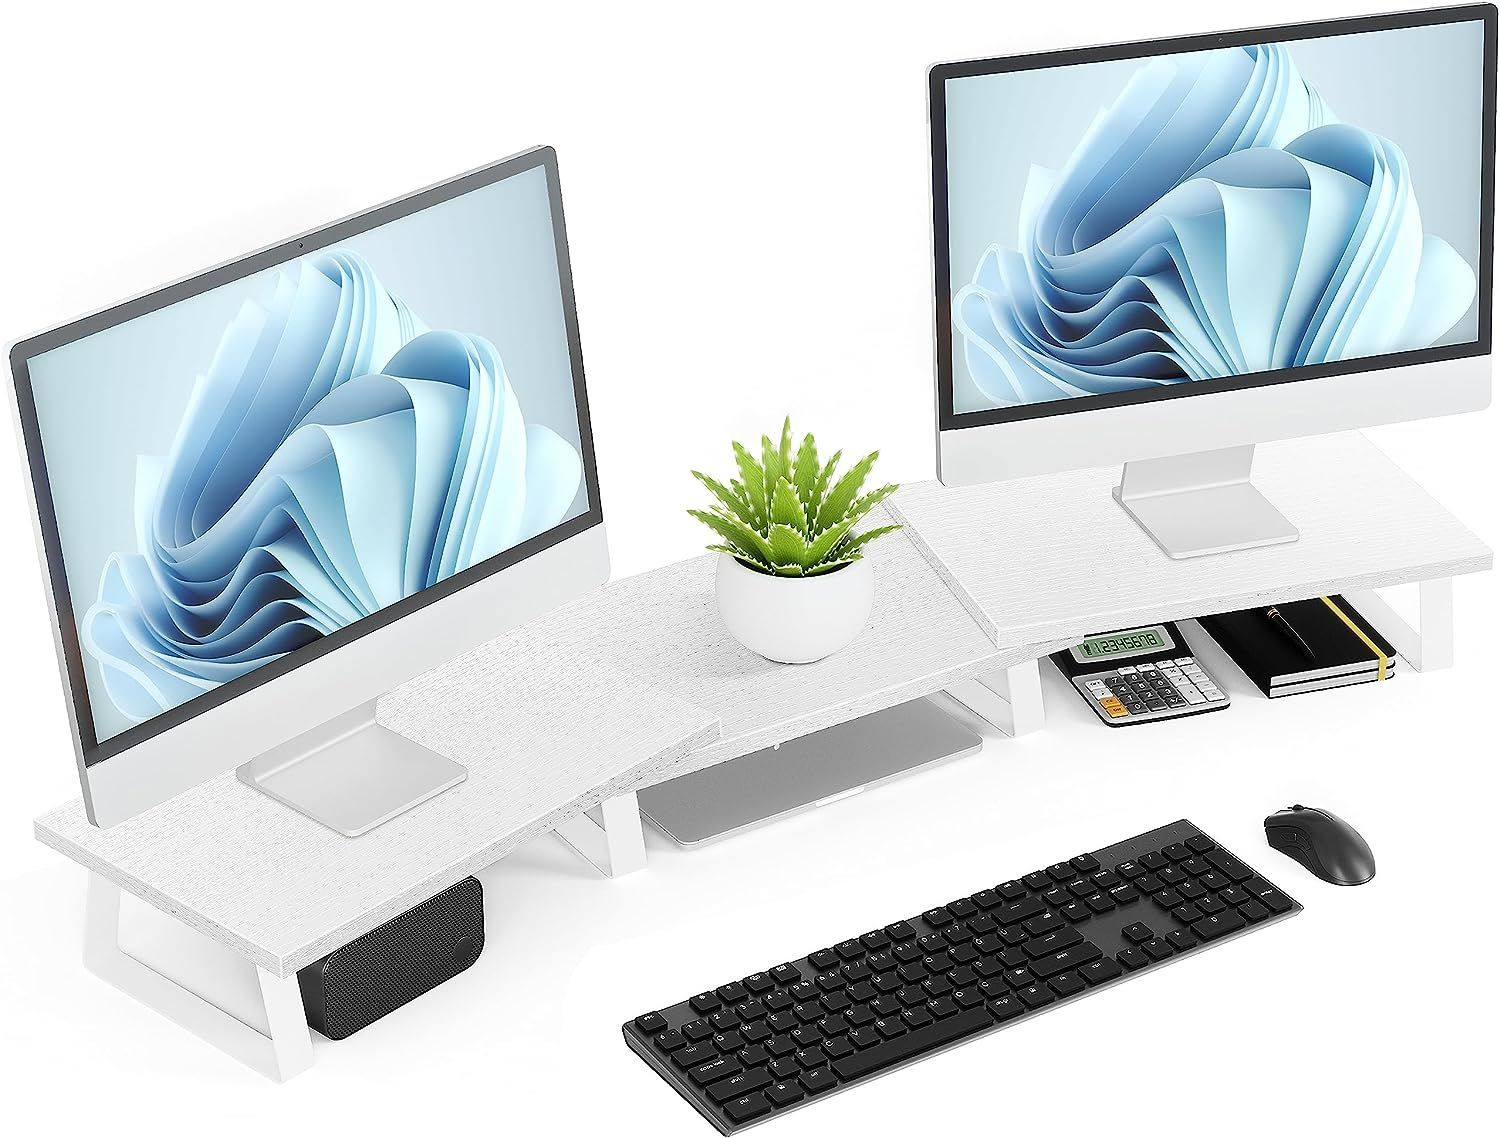 Aothia Large Dual Monitor Stand - Computer Stand, Desk Shelf White 